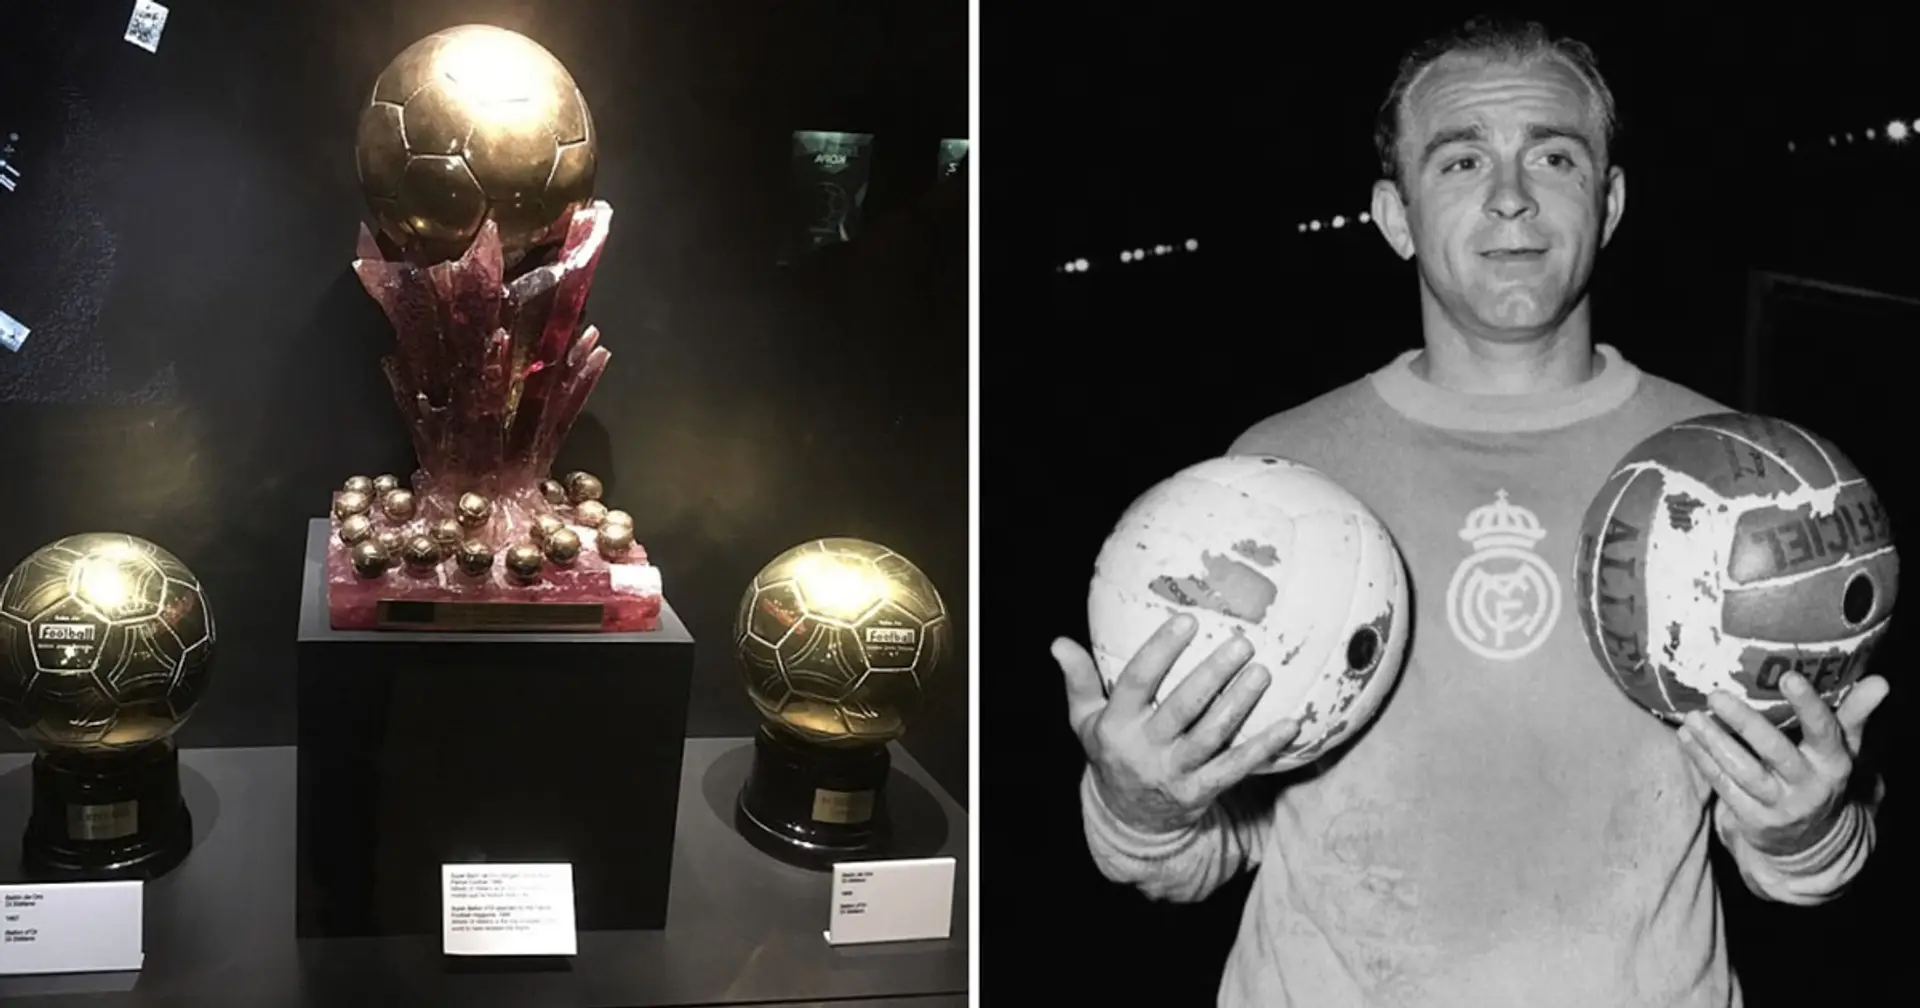 Unique Super Ballon d'Or that was at Real Madrid museum at Bernabéu - where is it now? Answered